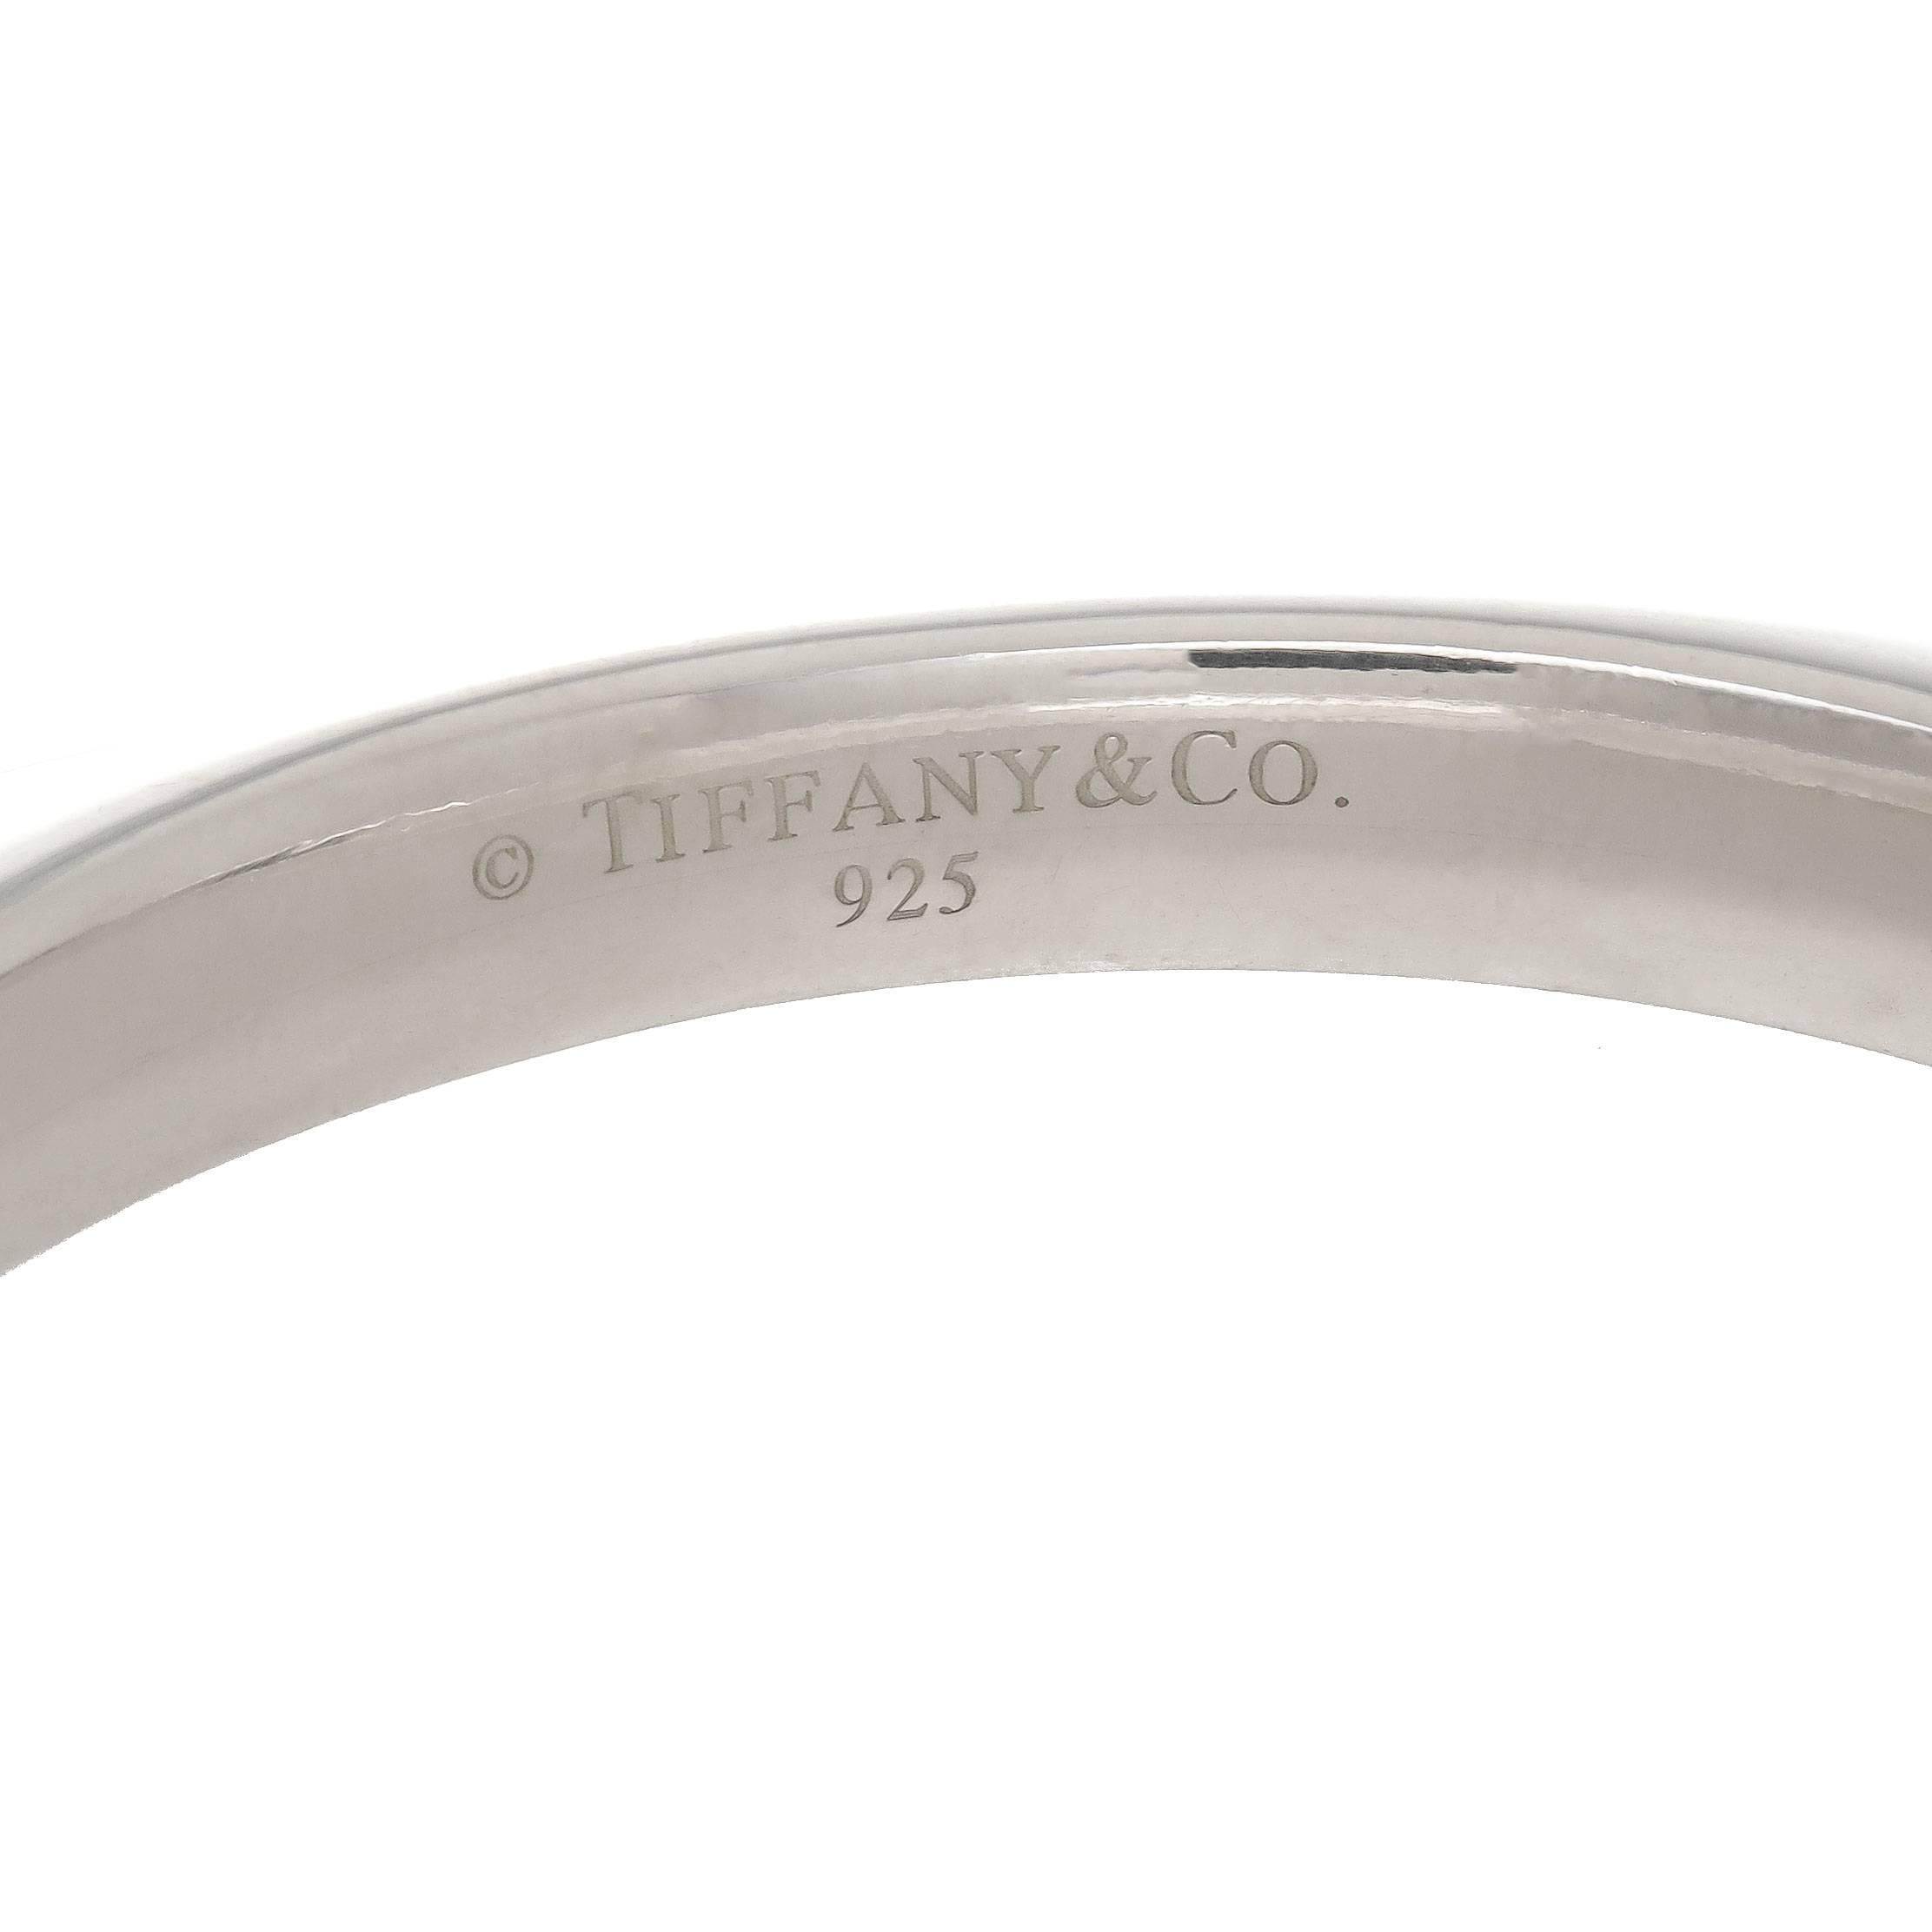 Circa 2000 Tiffany & Company Sterling Silver Square Cushion Bracelet. measuring 3 X 3 Inches with an inside measurement of 7 3/8 inch. 